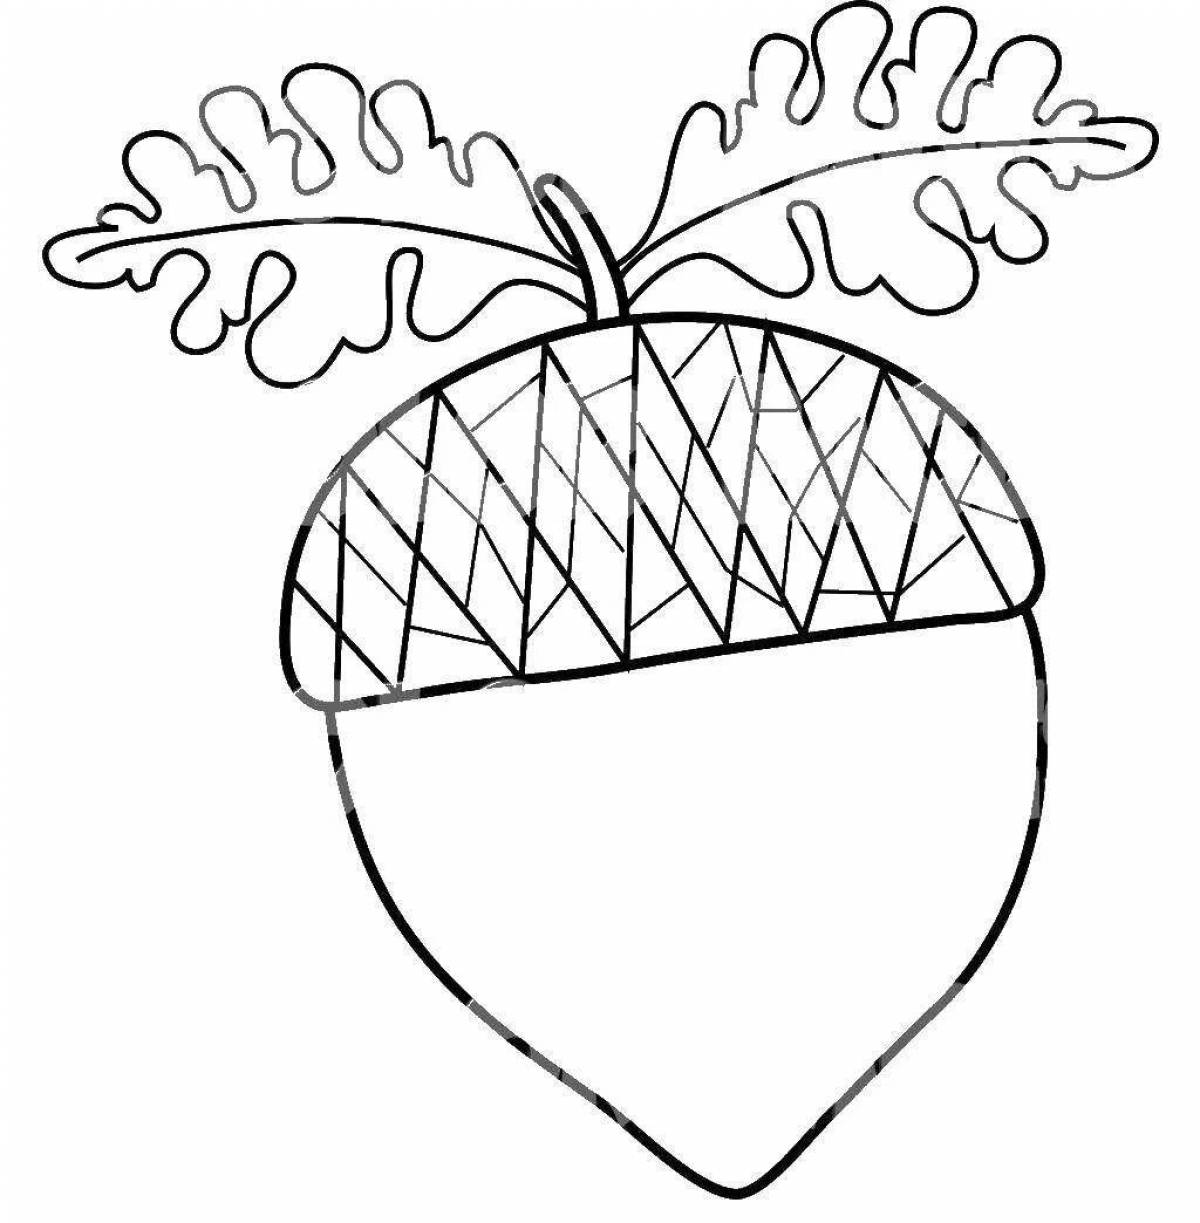 Exquisite acorn coloring book for kids